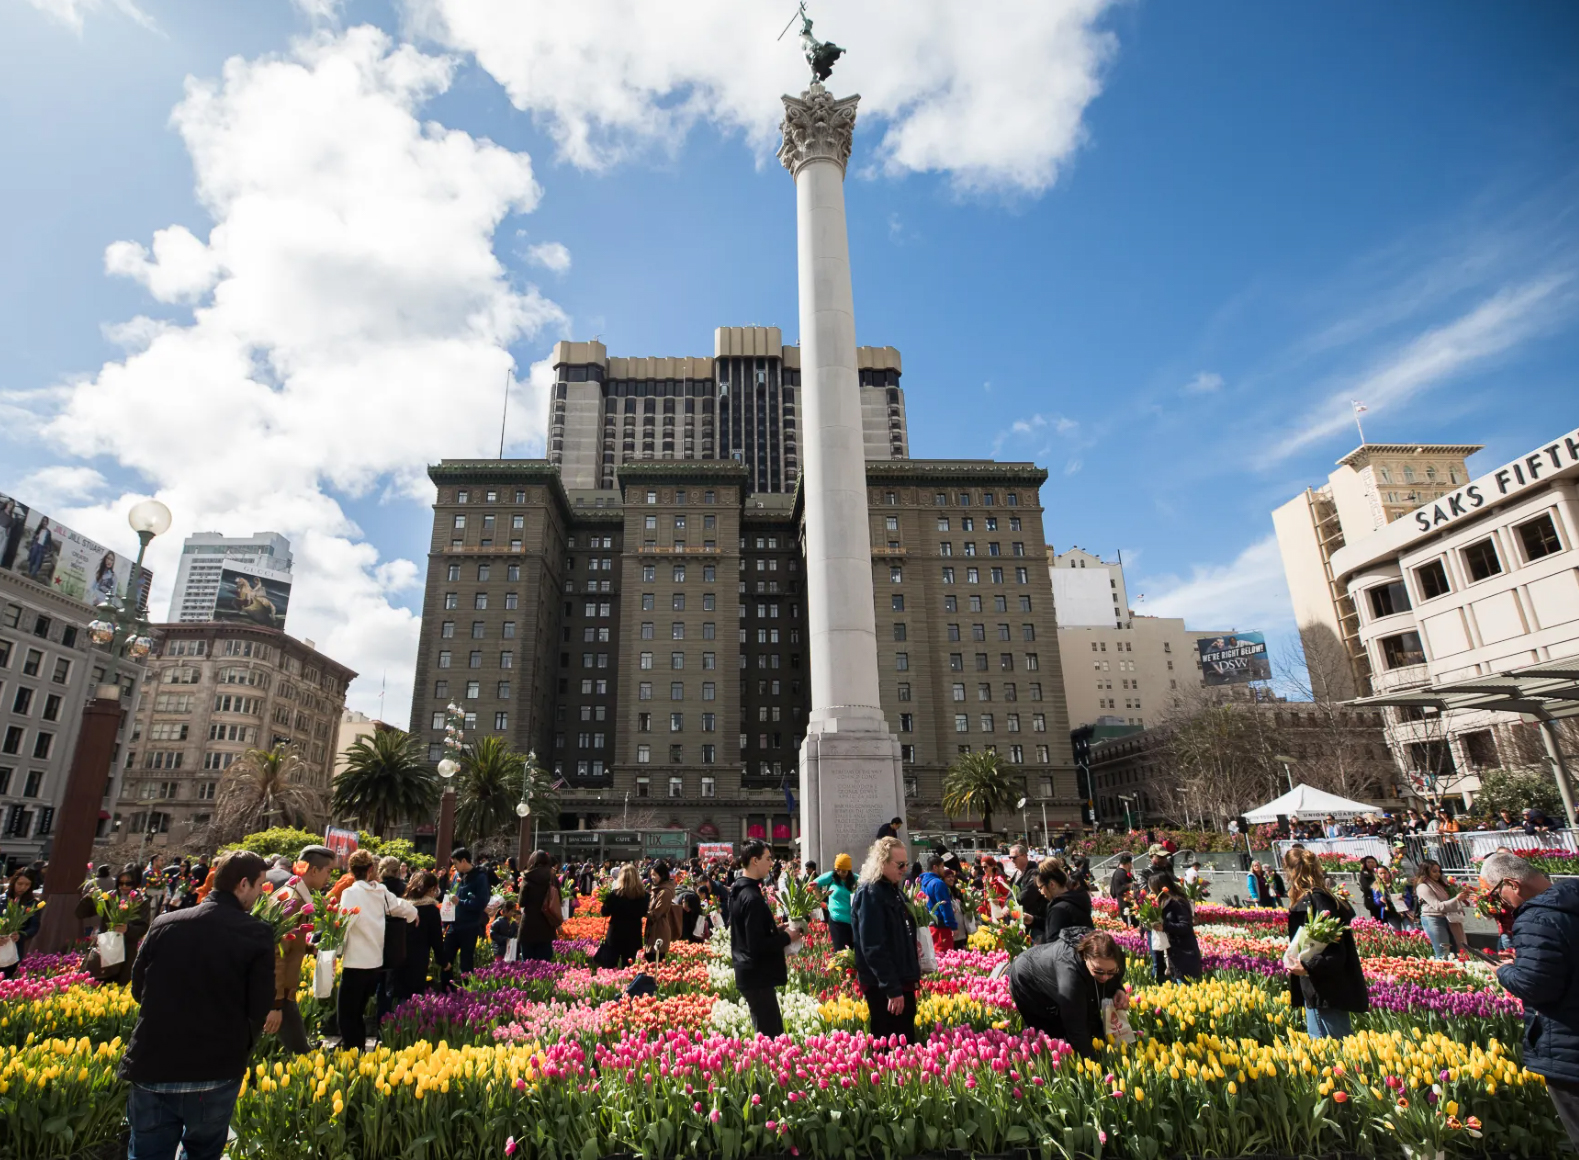 100,000 tulips filled Union Square bringing large crowds Downtown.